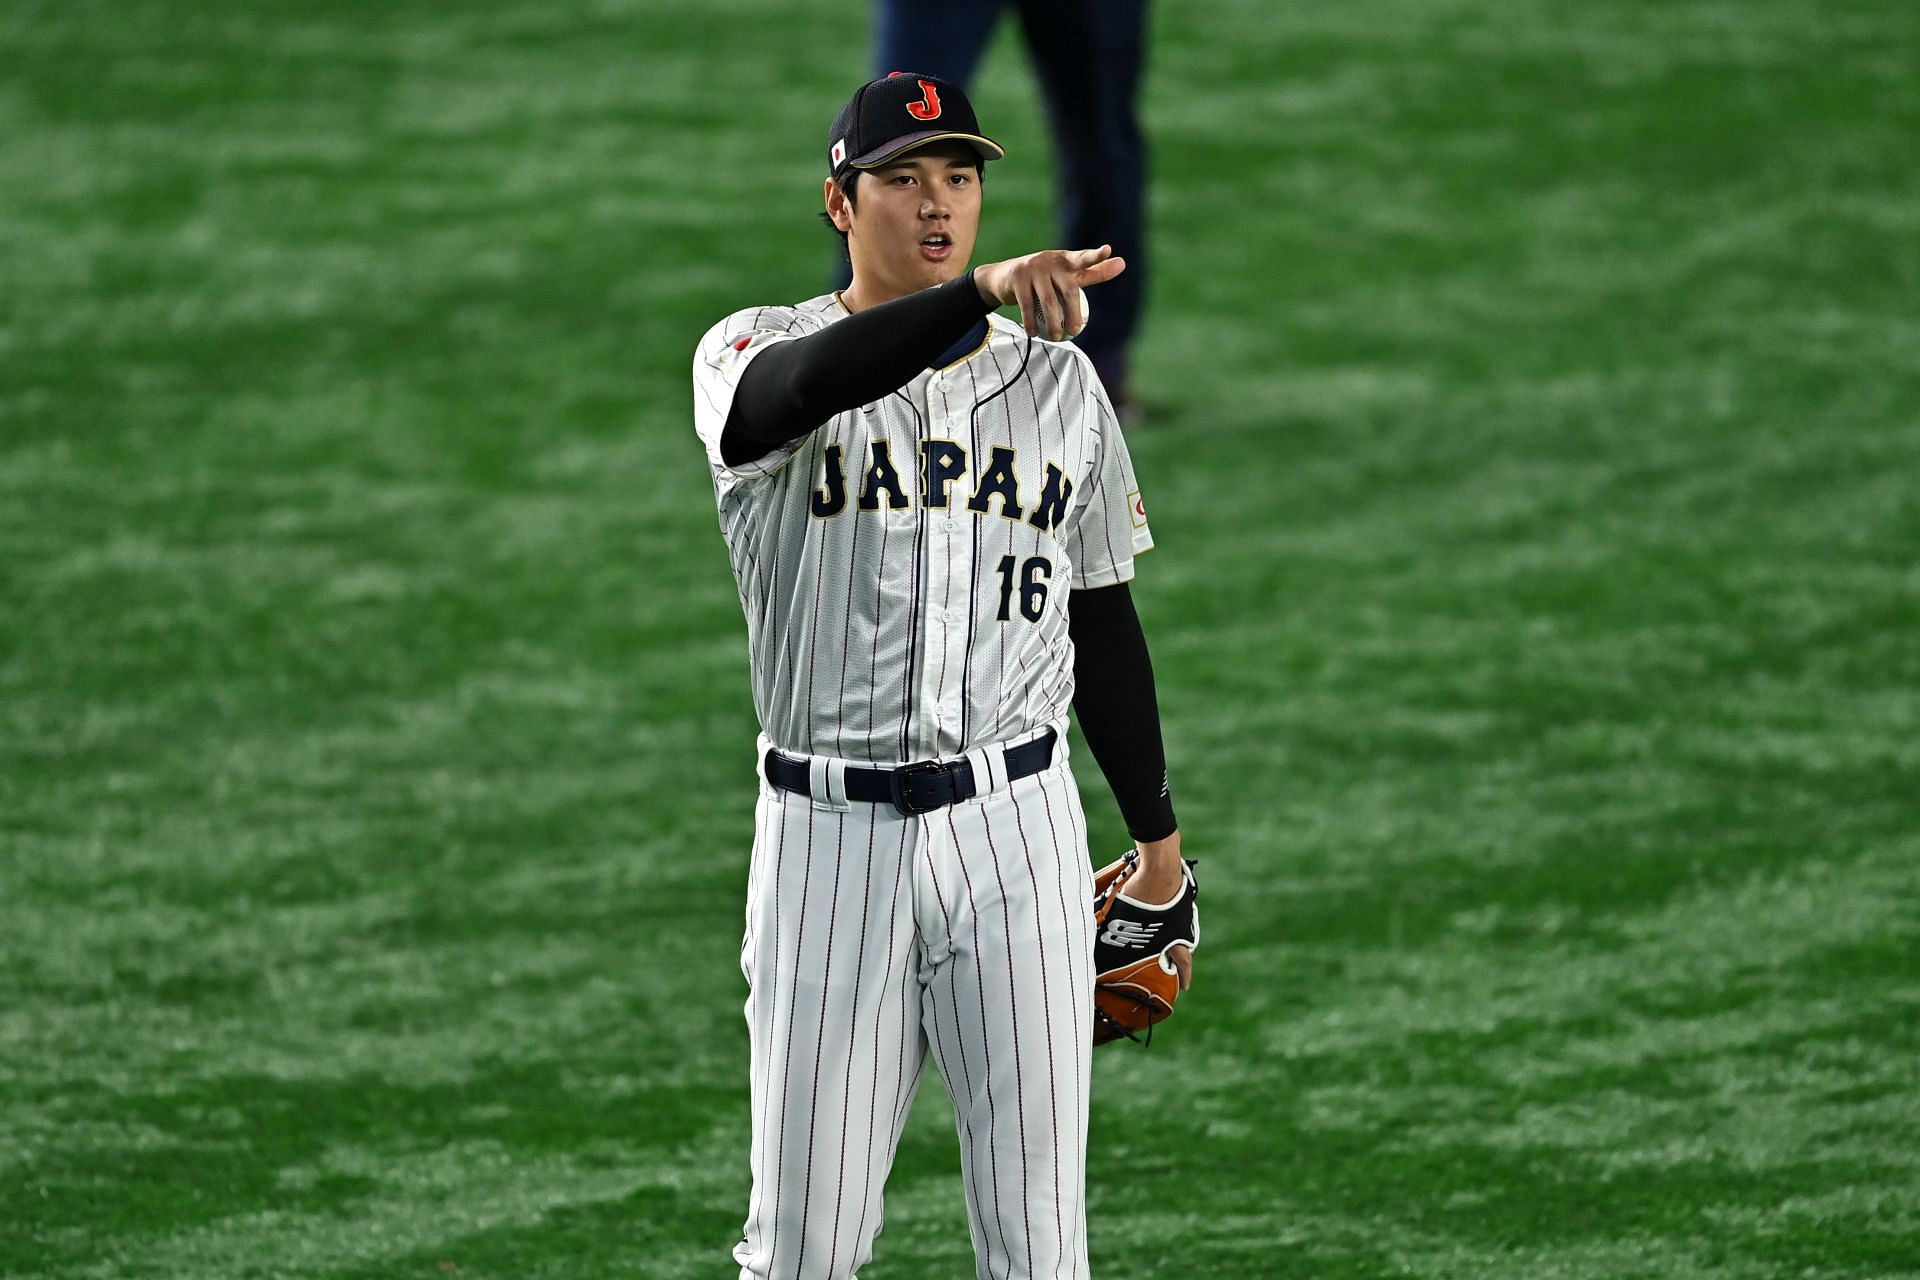 Shohei Ohtani Japan Stats: How did the two-way star fare in his